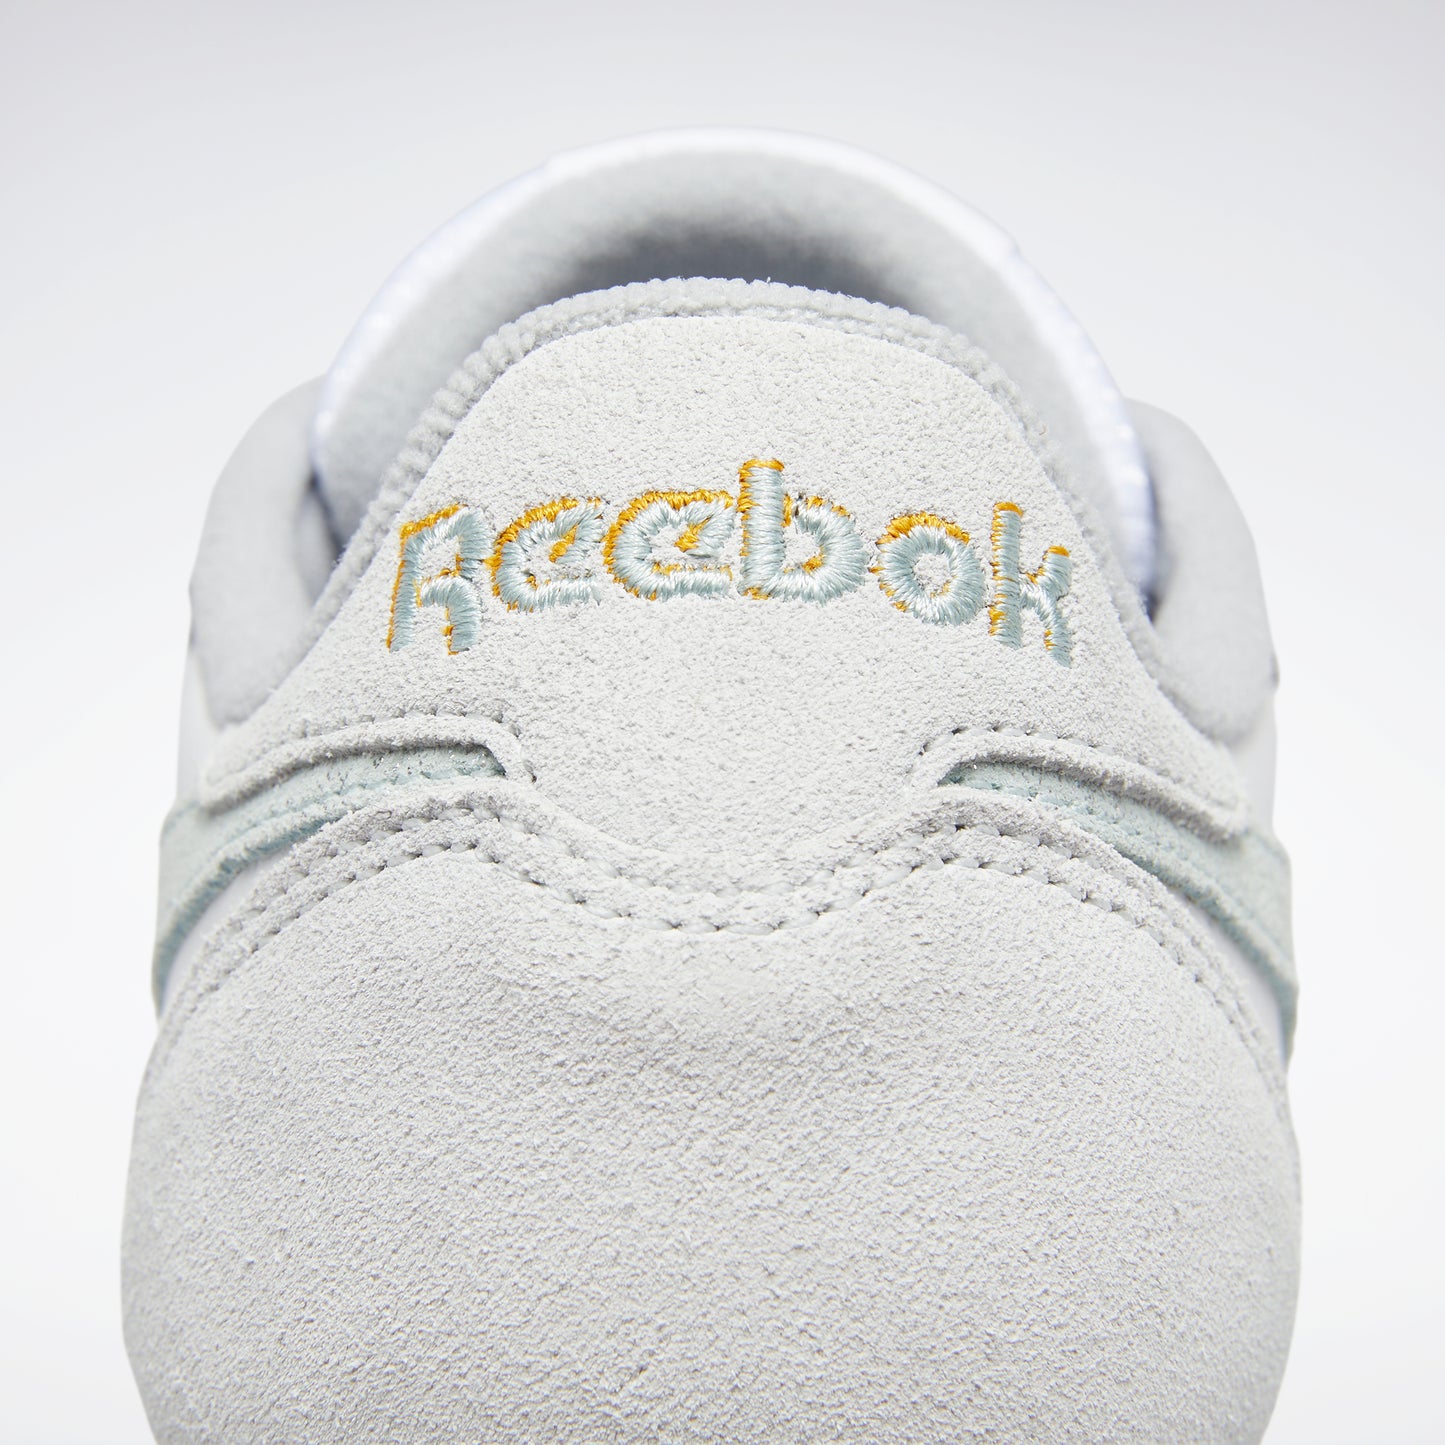 Reebok Footwear Women Classic Leather Shoes Ftwwht/Seagry/Clgry1